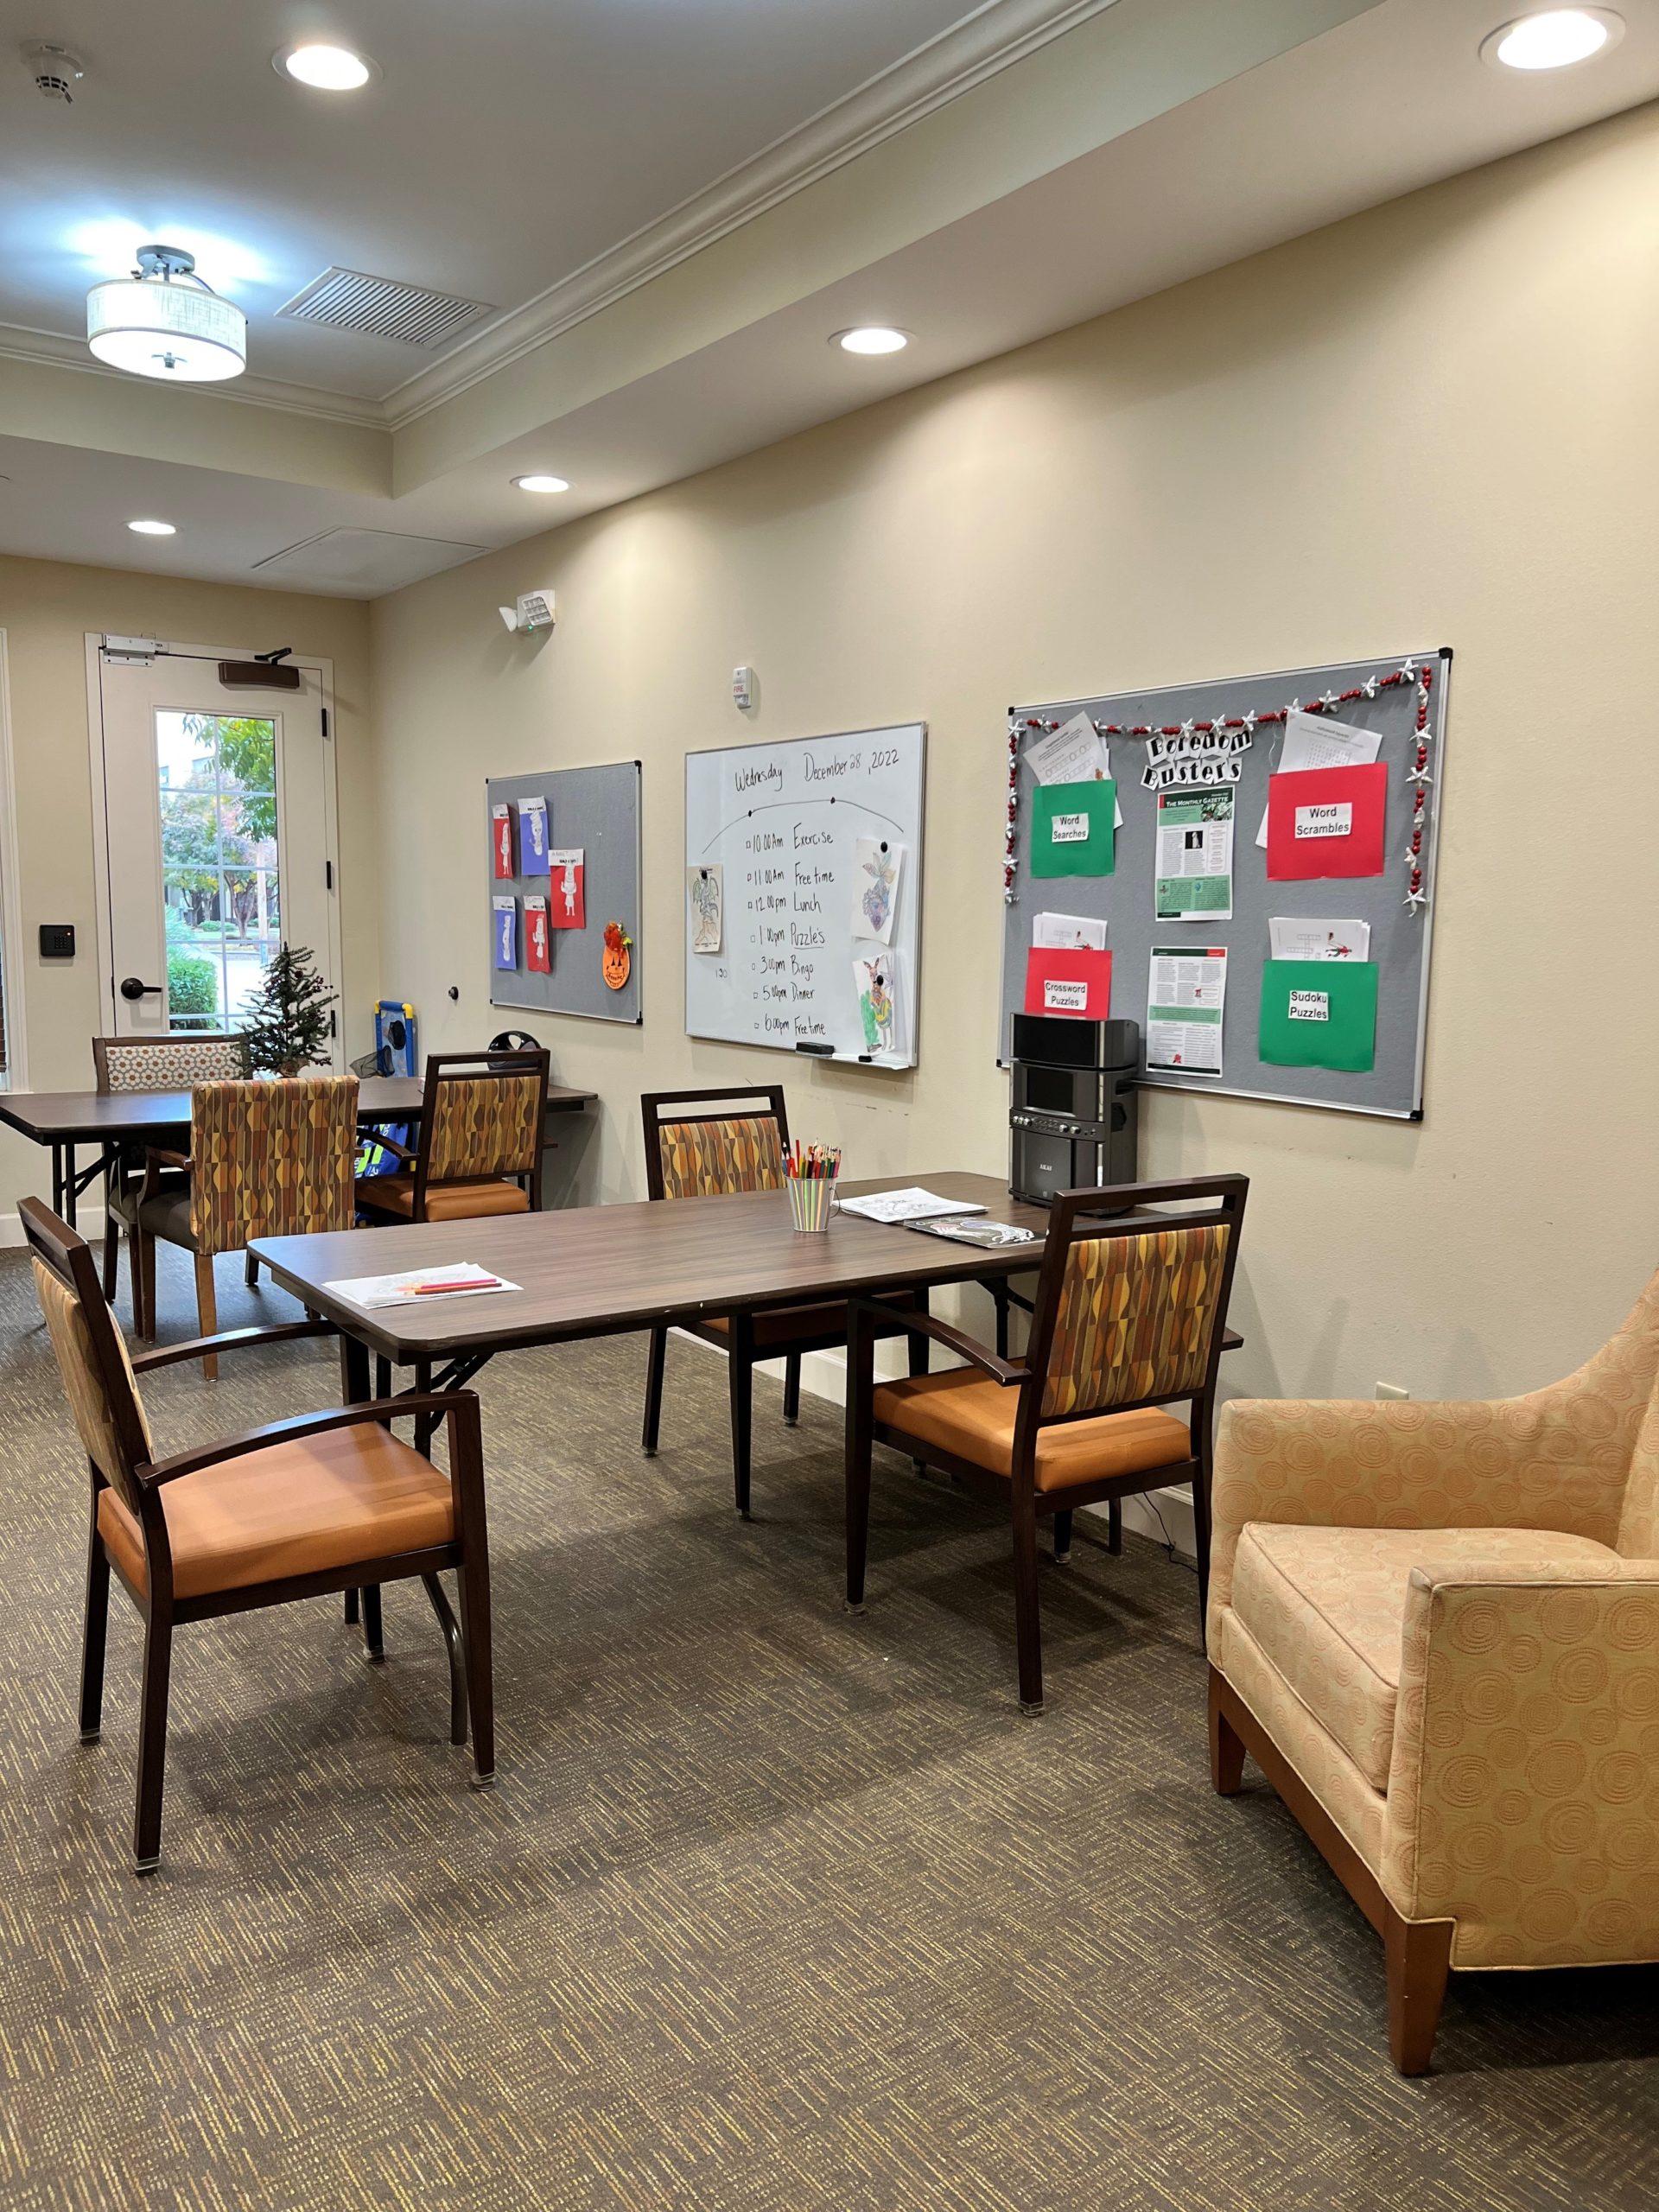 Activity Room at Memory Care Community in Surprise AZ